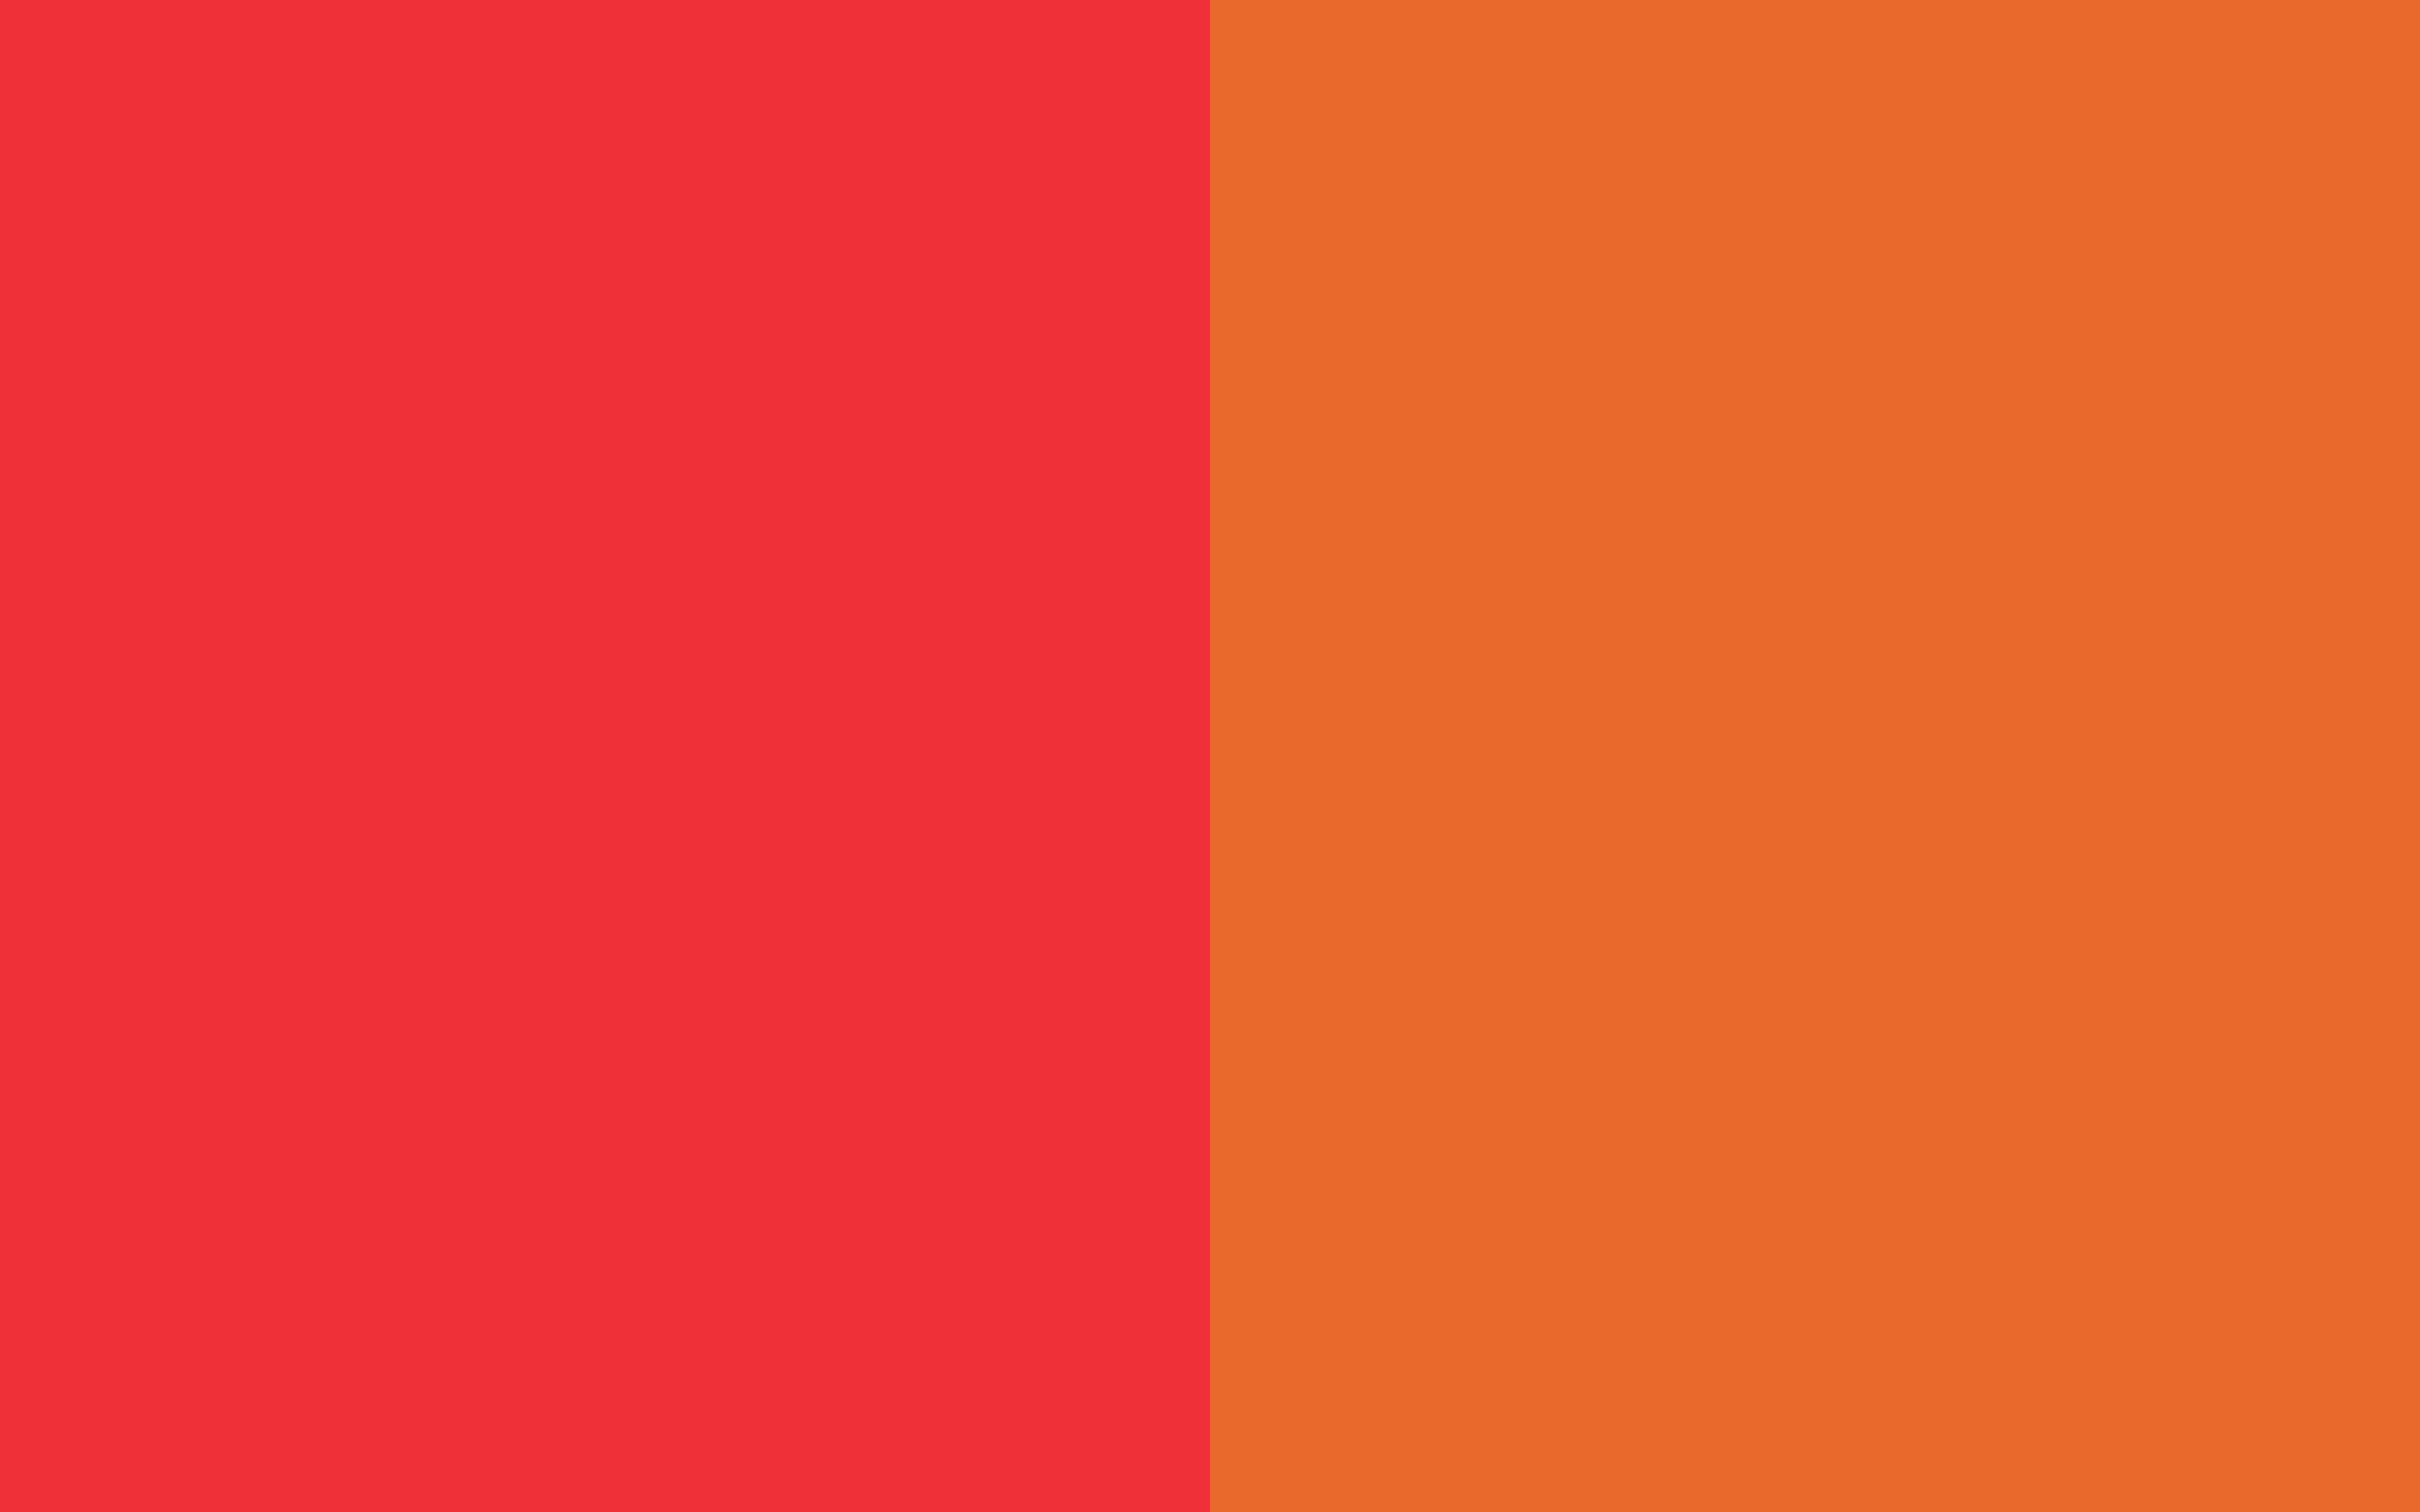 Deep Carmine Pink and Deep Carrot Orange solid two color background